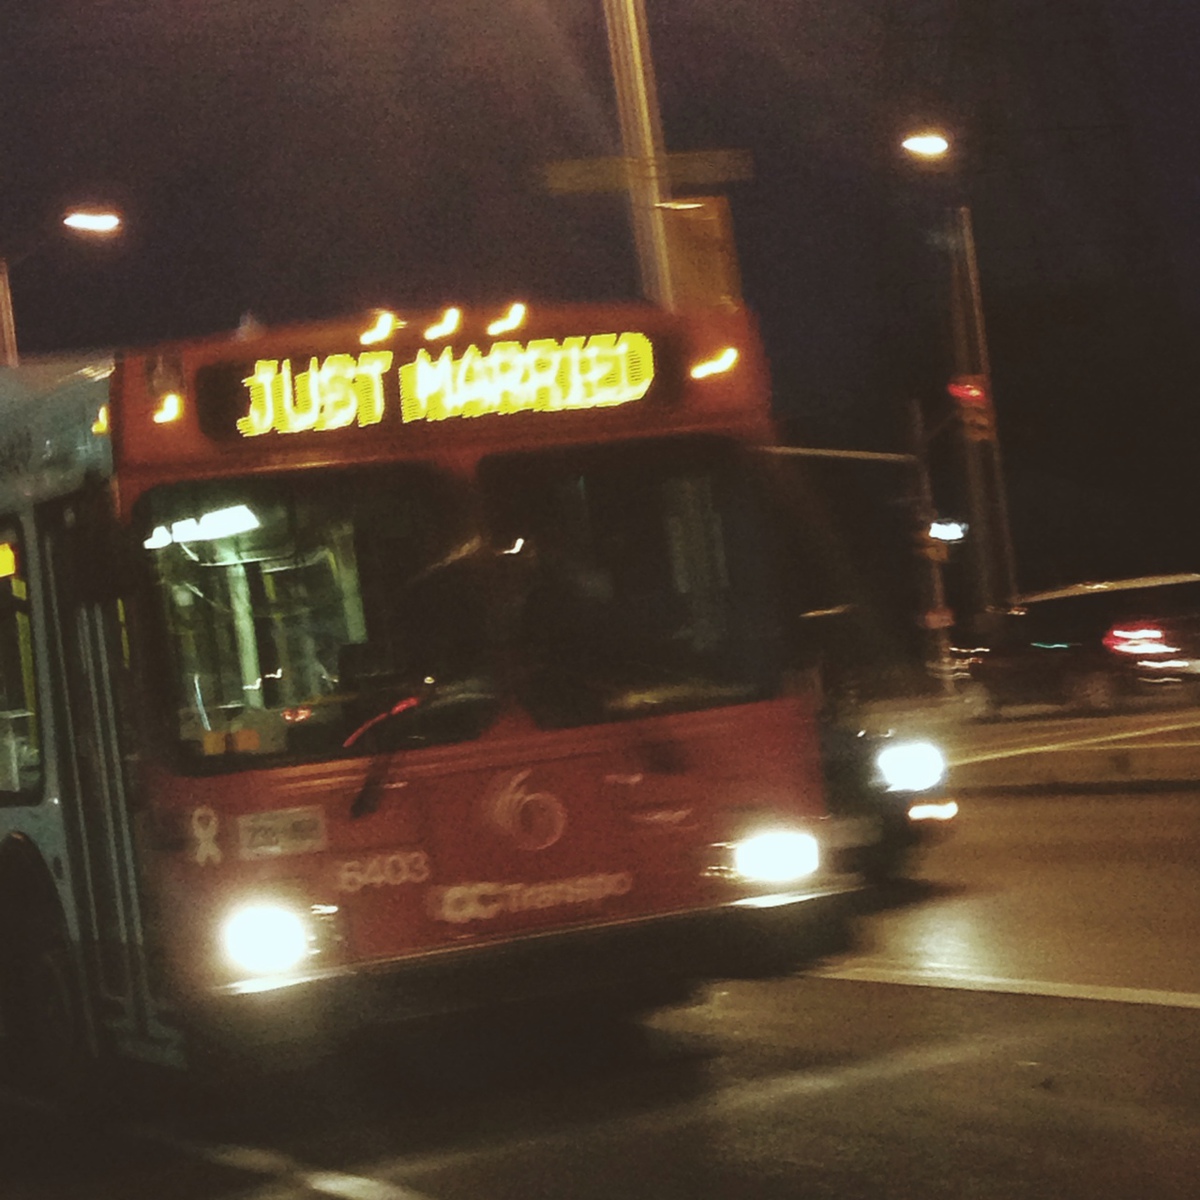 JUST MARRIED @bus